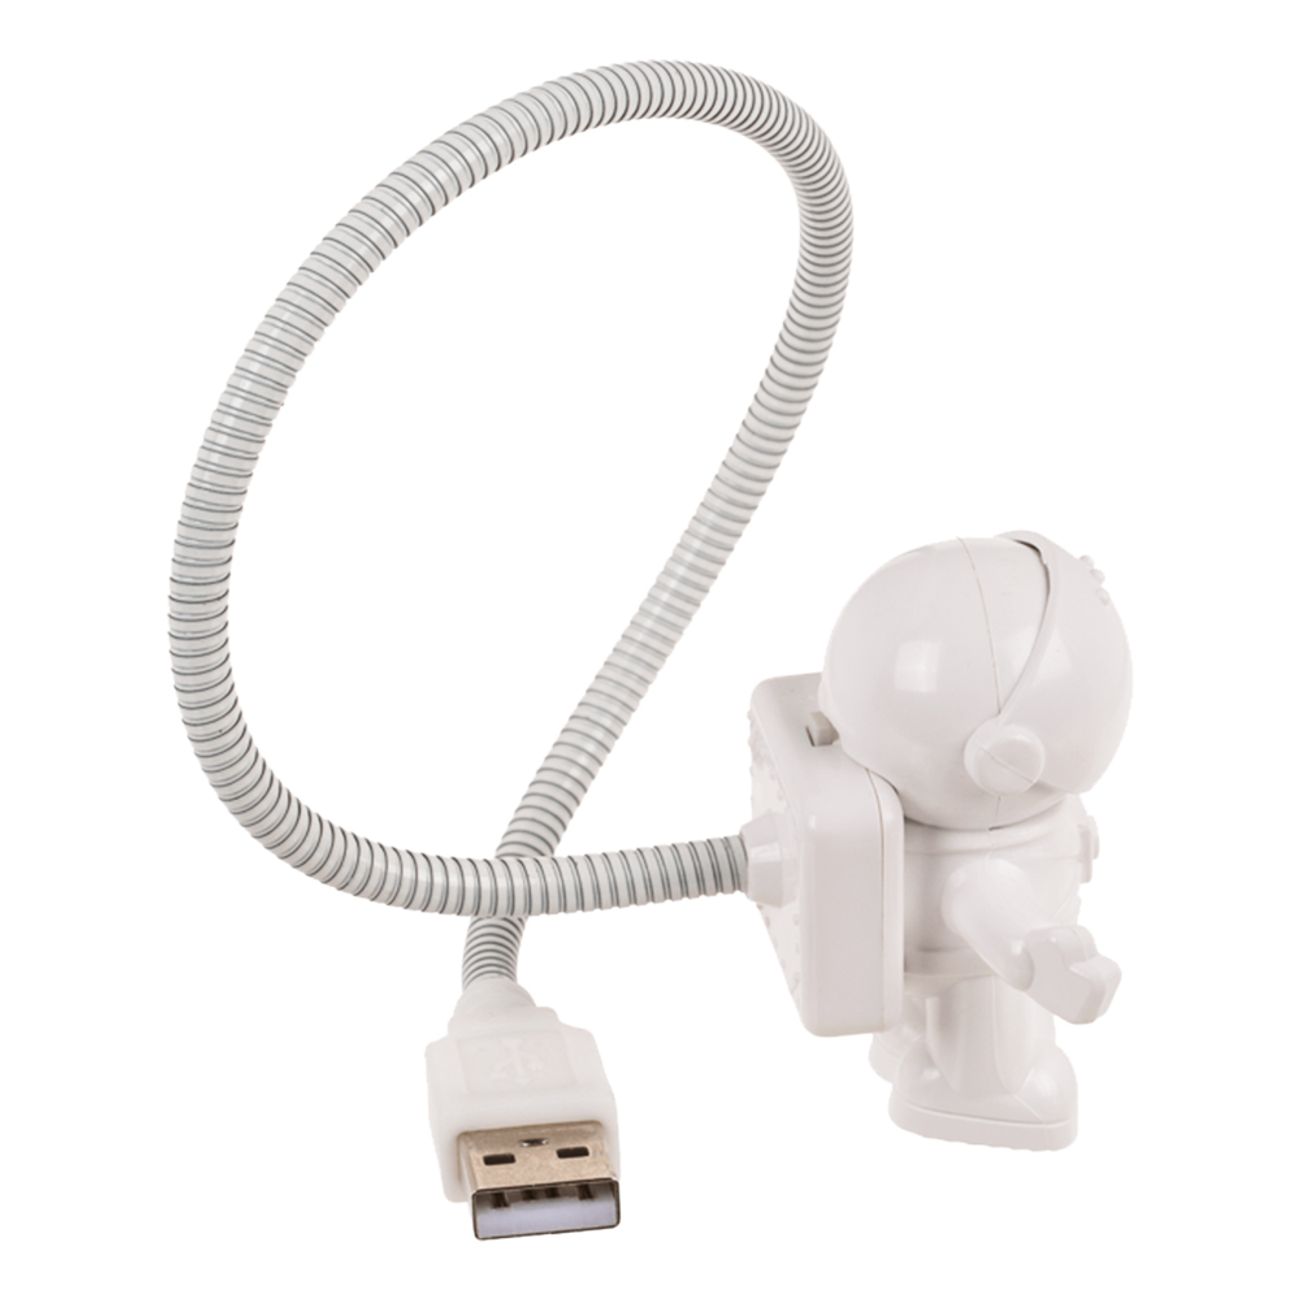 usb-led-astronaut-ca-7-x-335-cm-with-usb-cable--in-gift-box-100136-4